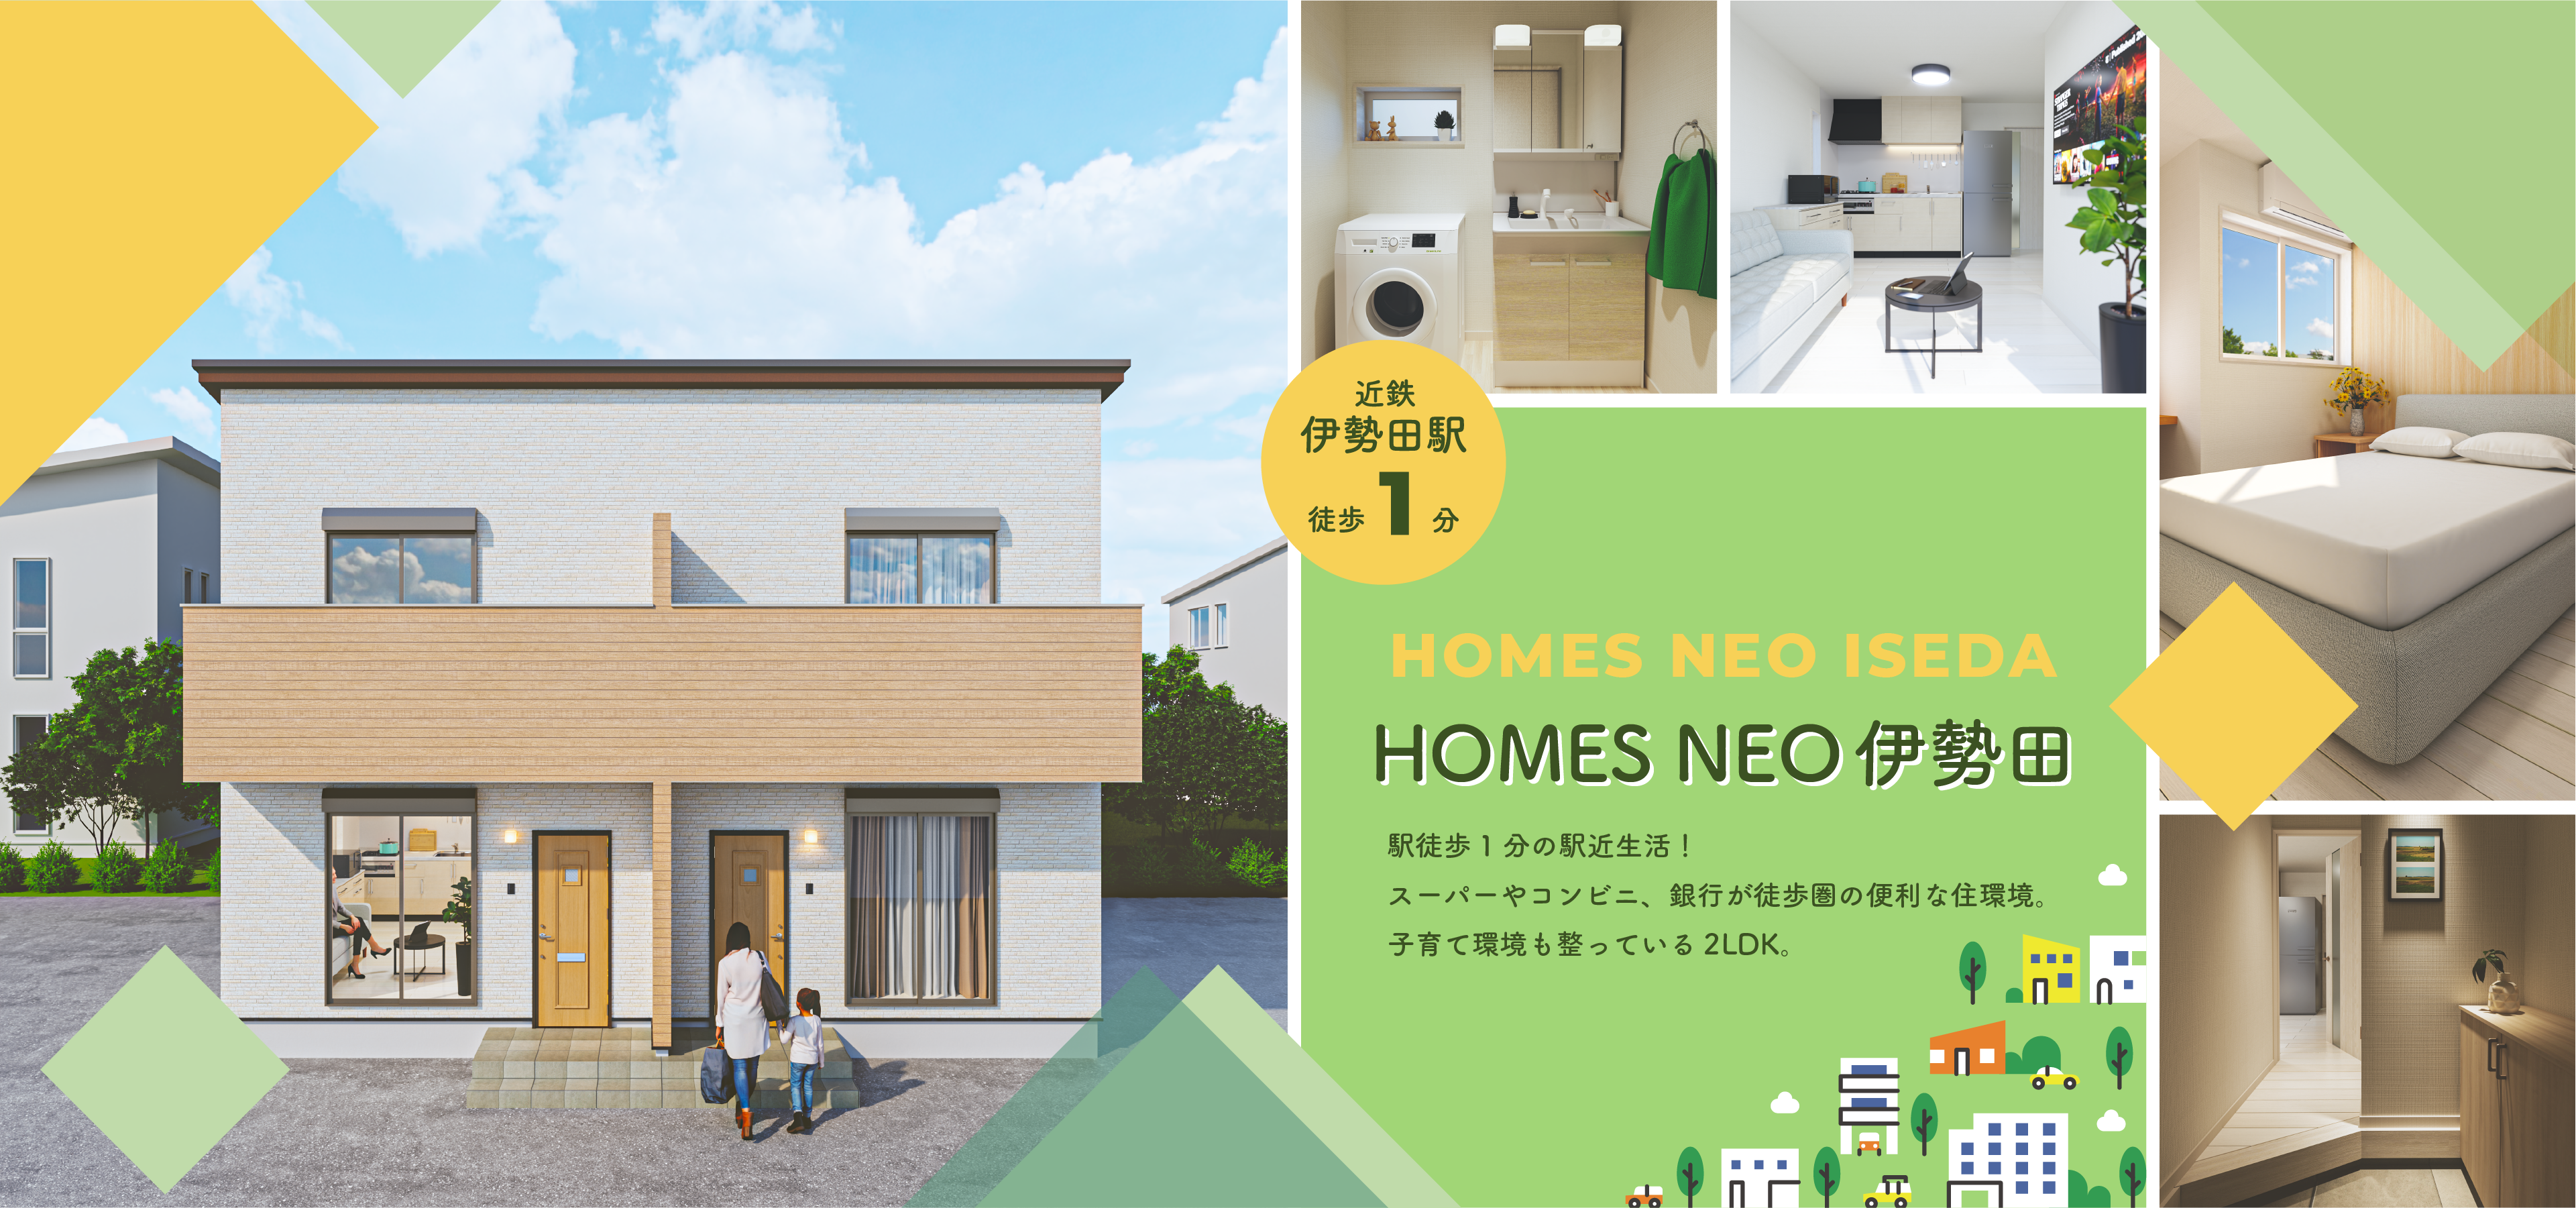 HOMES NEO 伊勢田